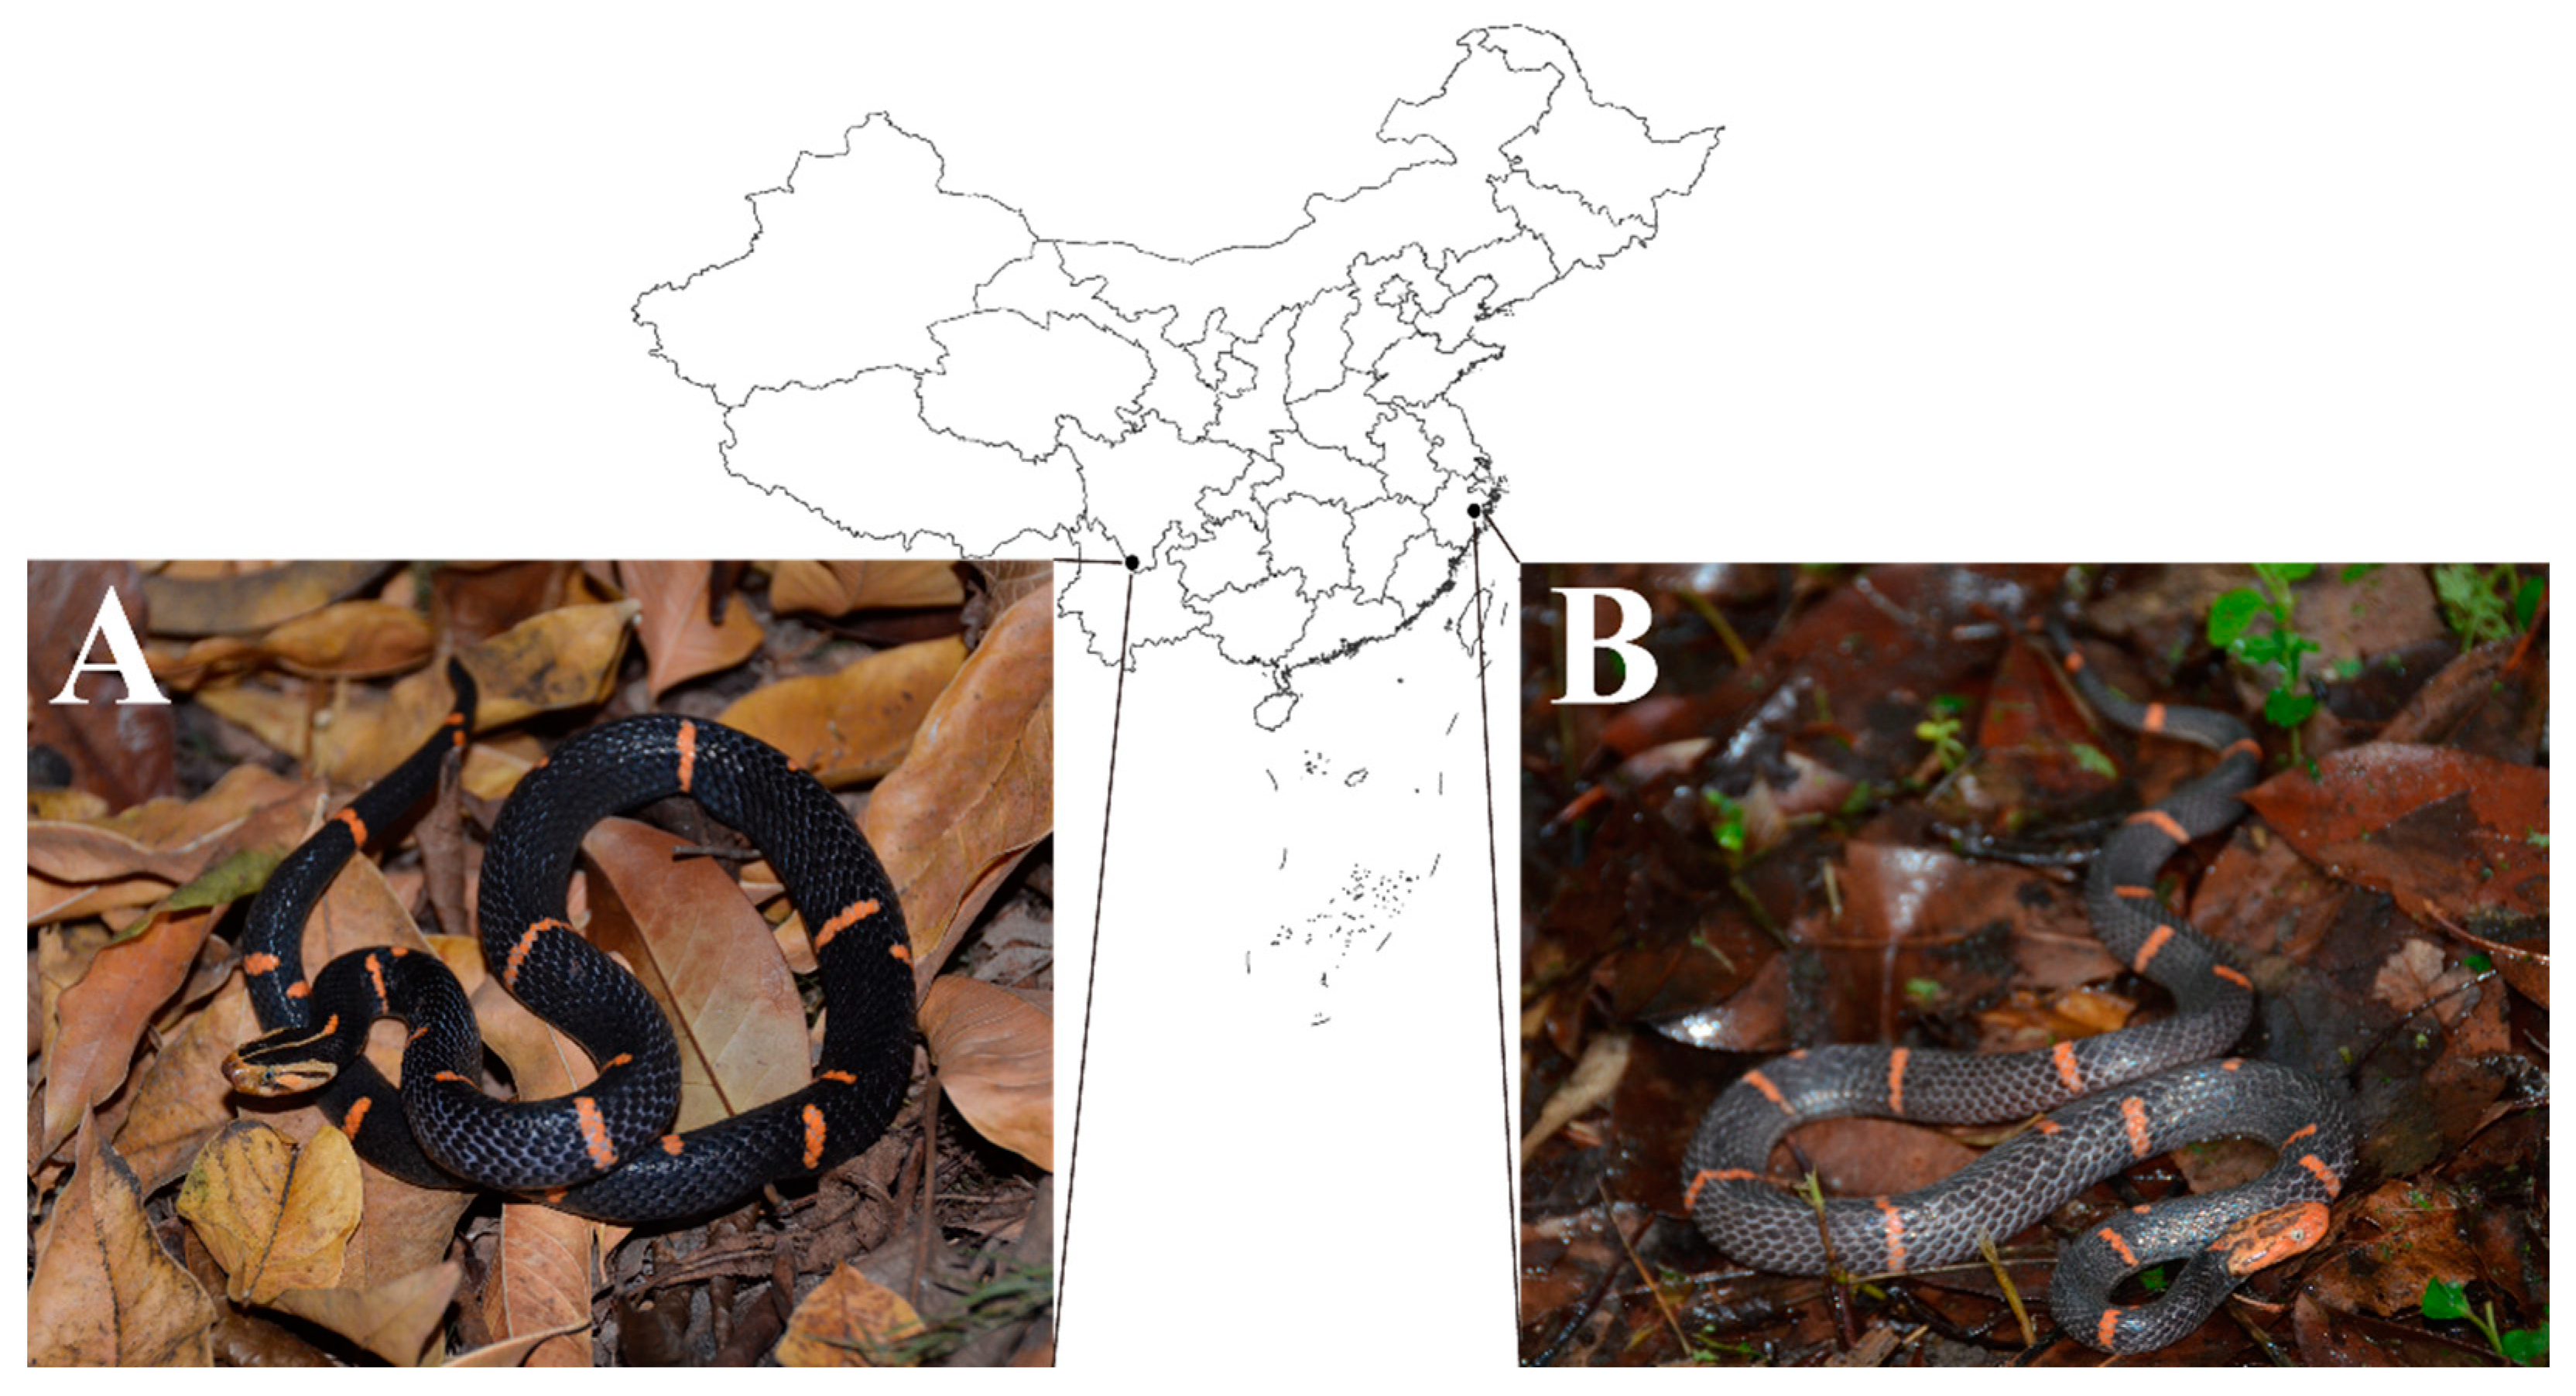 Toxins Free Full-Text Differences between Two Groups of Burmese Vipers (Viperidae Azemiops) in the Proteomic Profiles, Immunoreactivity and Biochemical Functions of Their Venoms